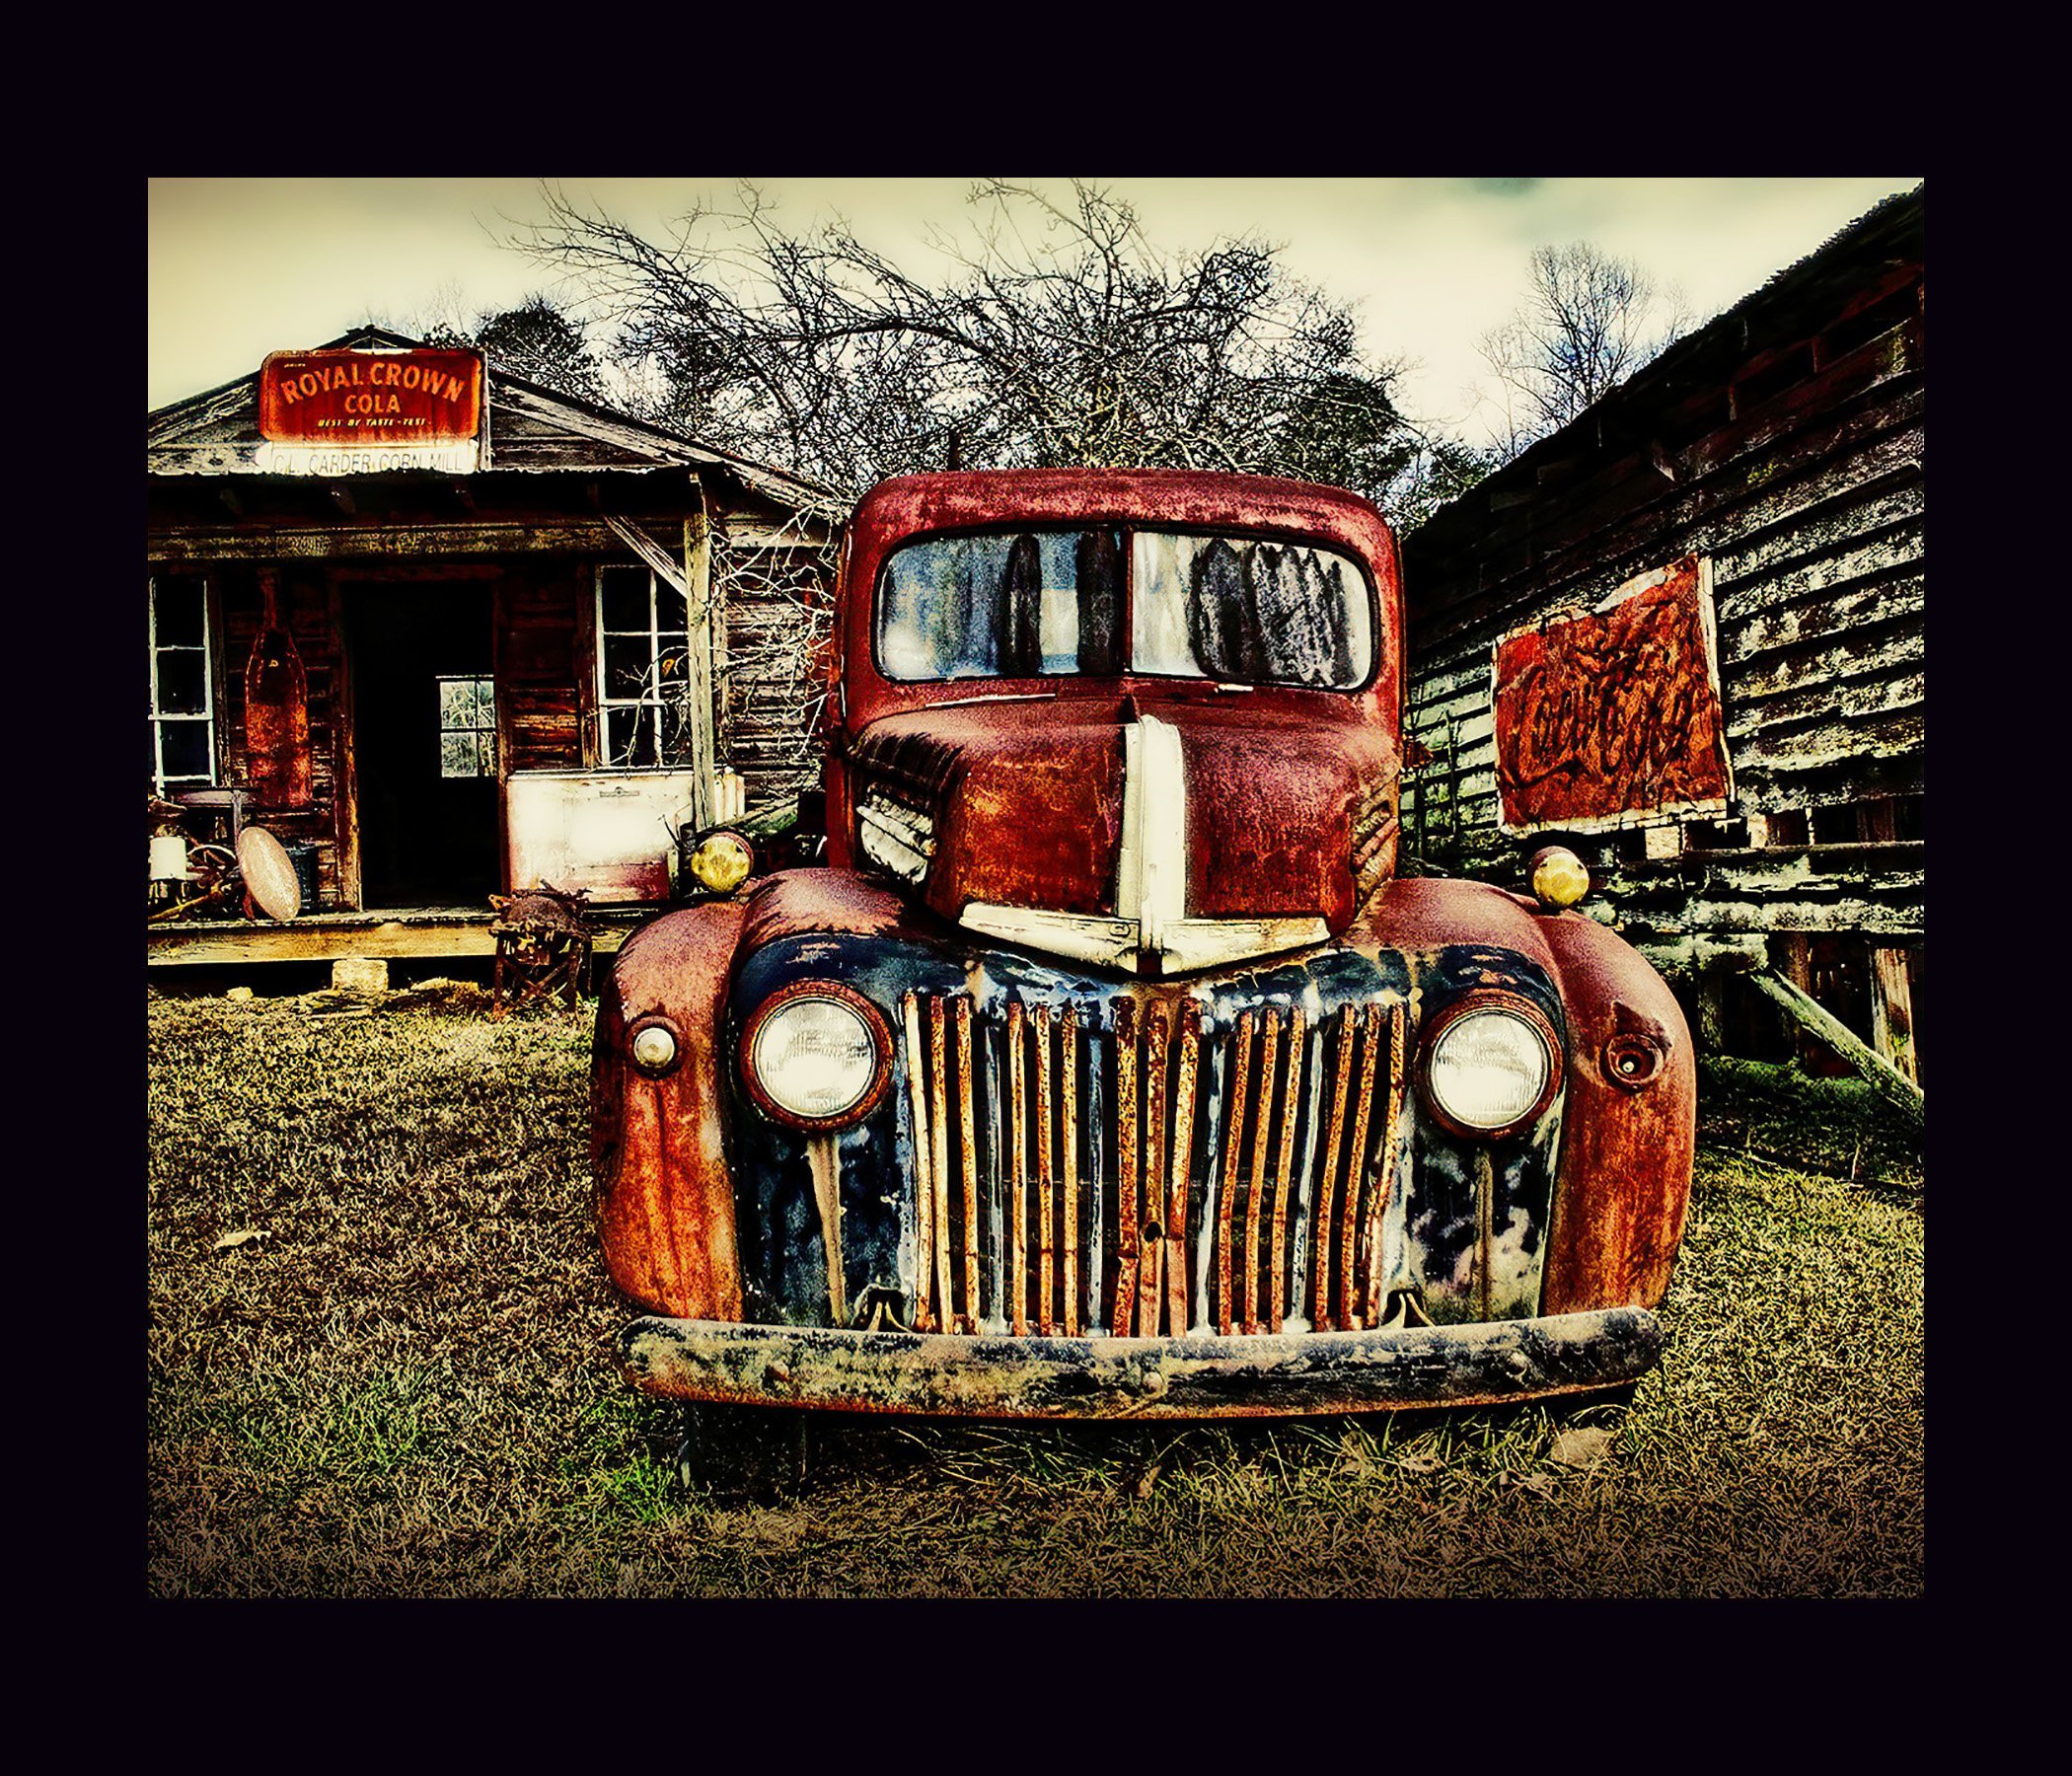 Dude Clark: 'Highway 64', 2017 Digital Photograph, Americana. Roadside structures and truck. ...